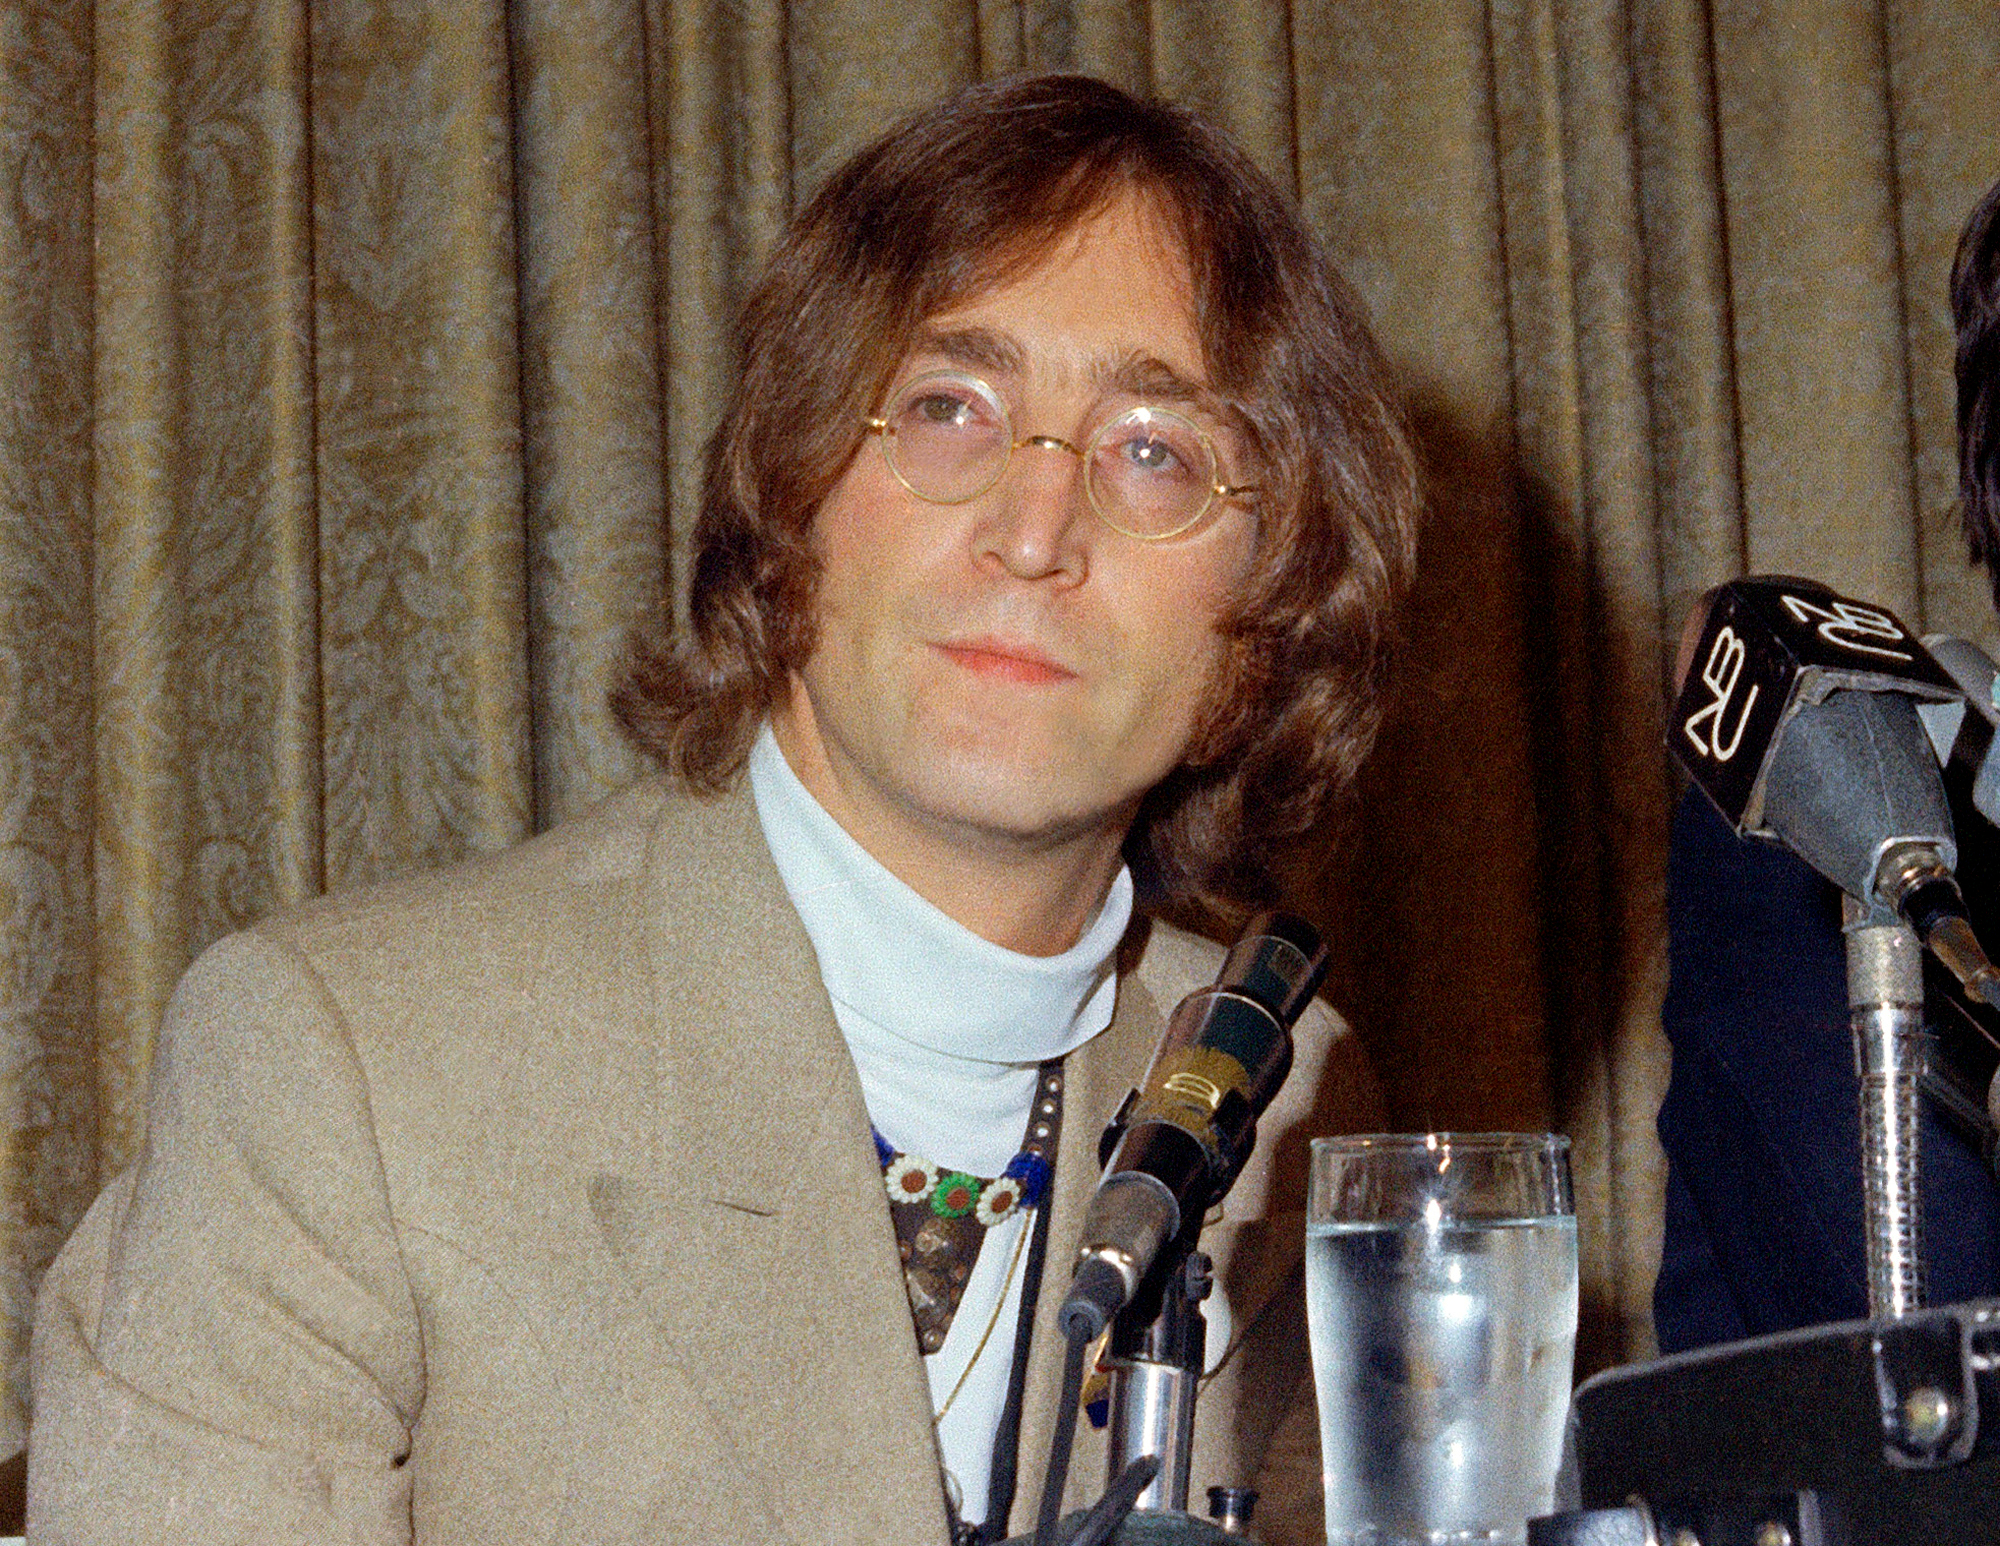 John Lennon pictured at a 1971 press conference